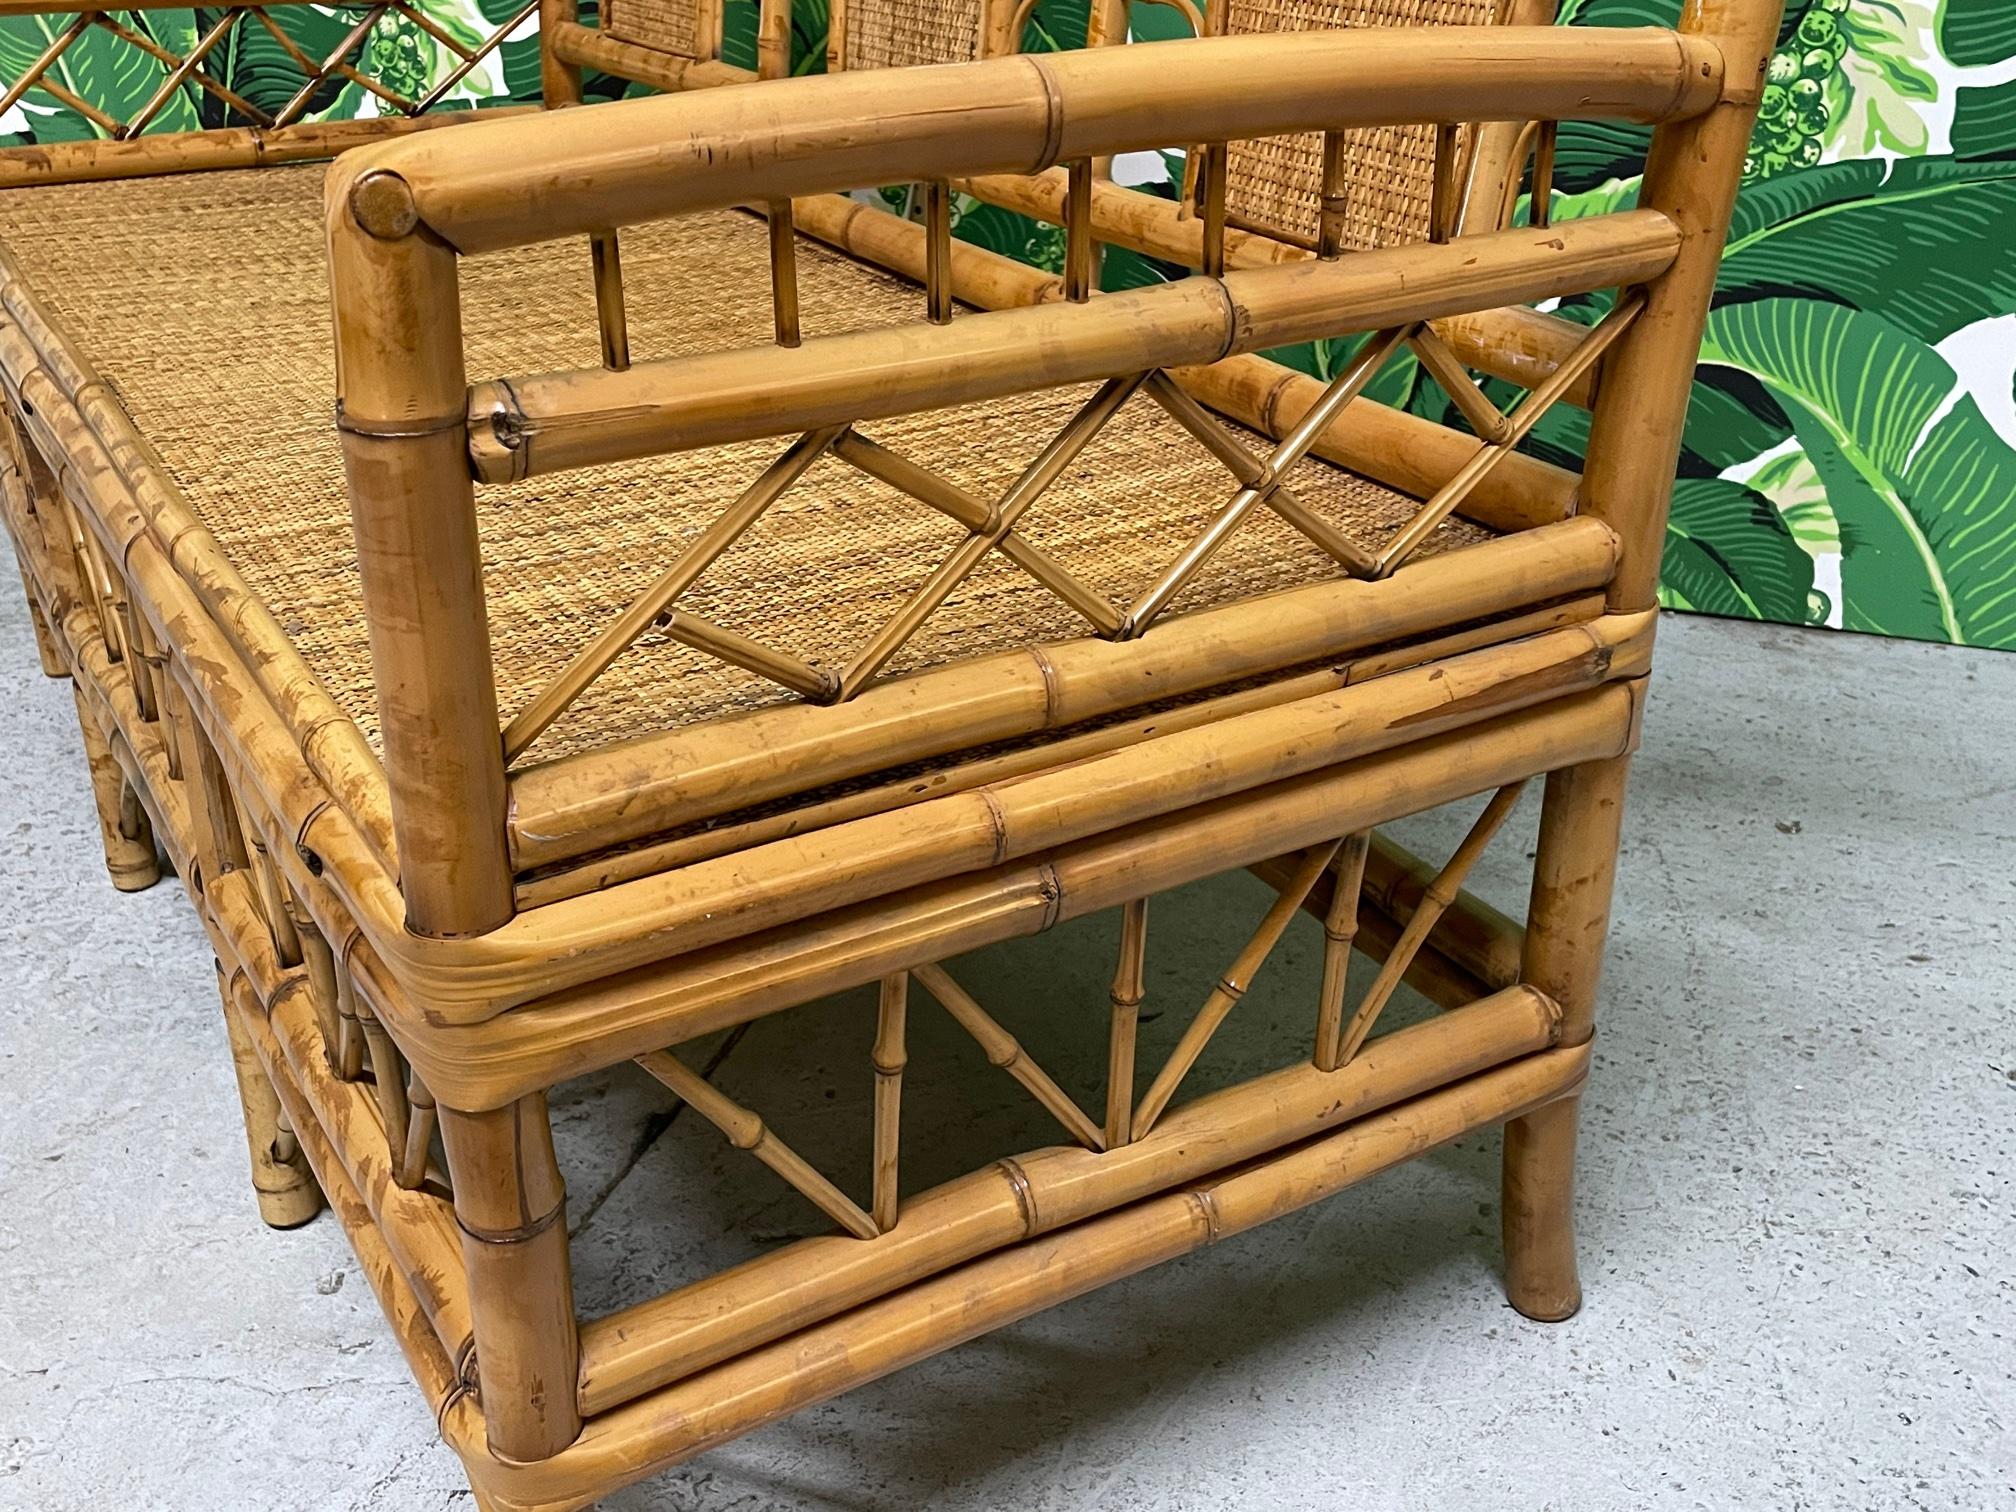 Vintage bamboo bench features an Asian chinoiserie design and woven wicker seat and back inserts. Very good condition with only minor imperfections consistent with age.